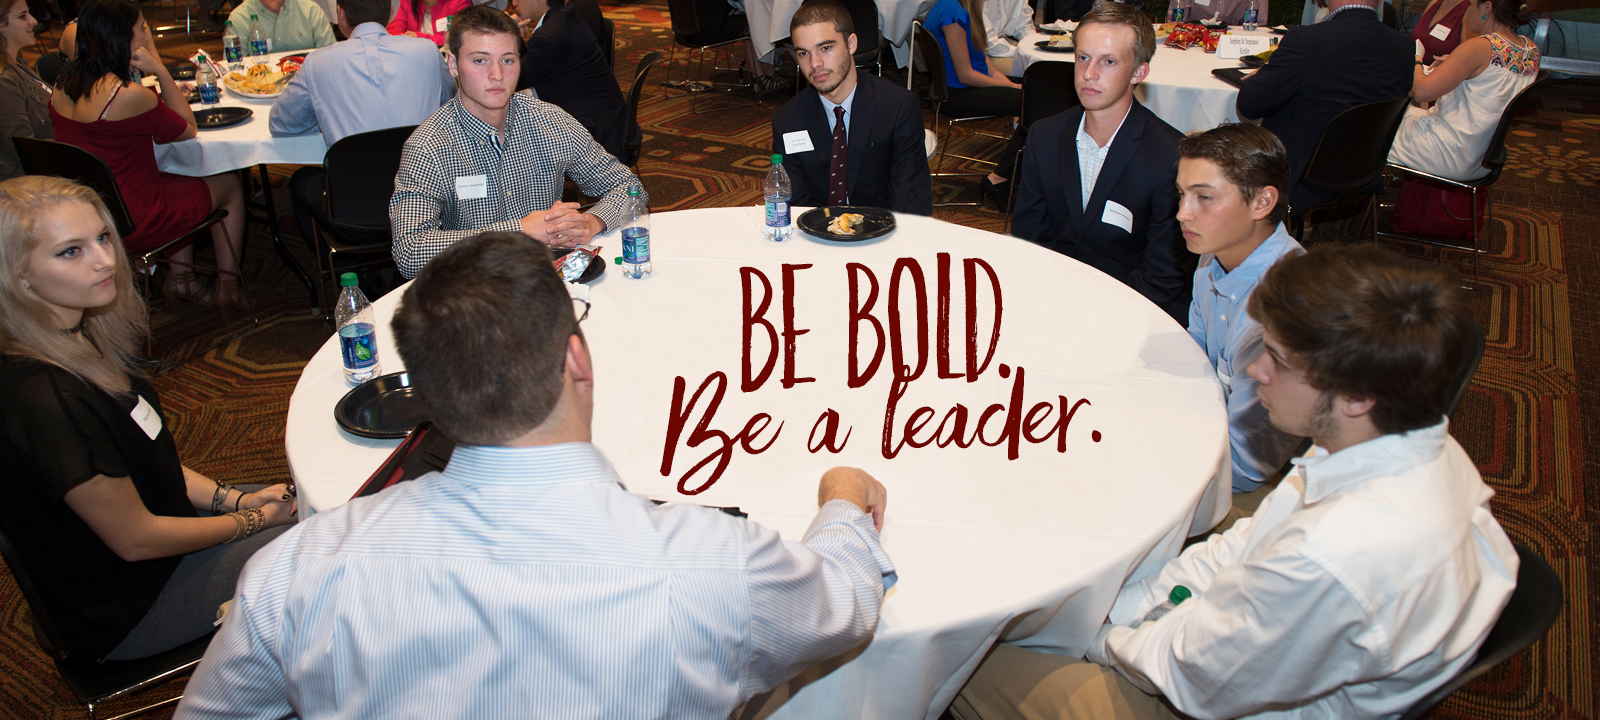 Executive mentors put you face-to-face with opportunity.